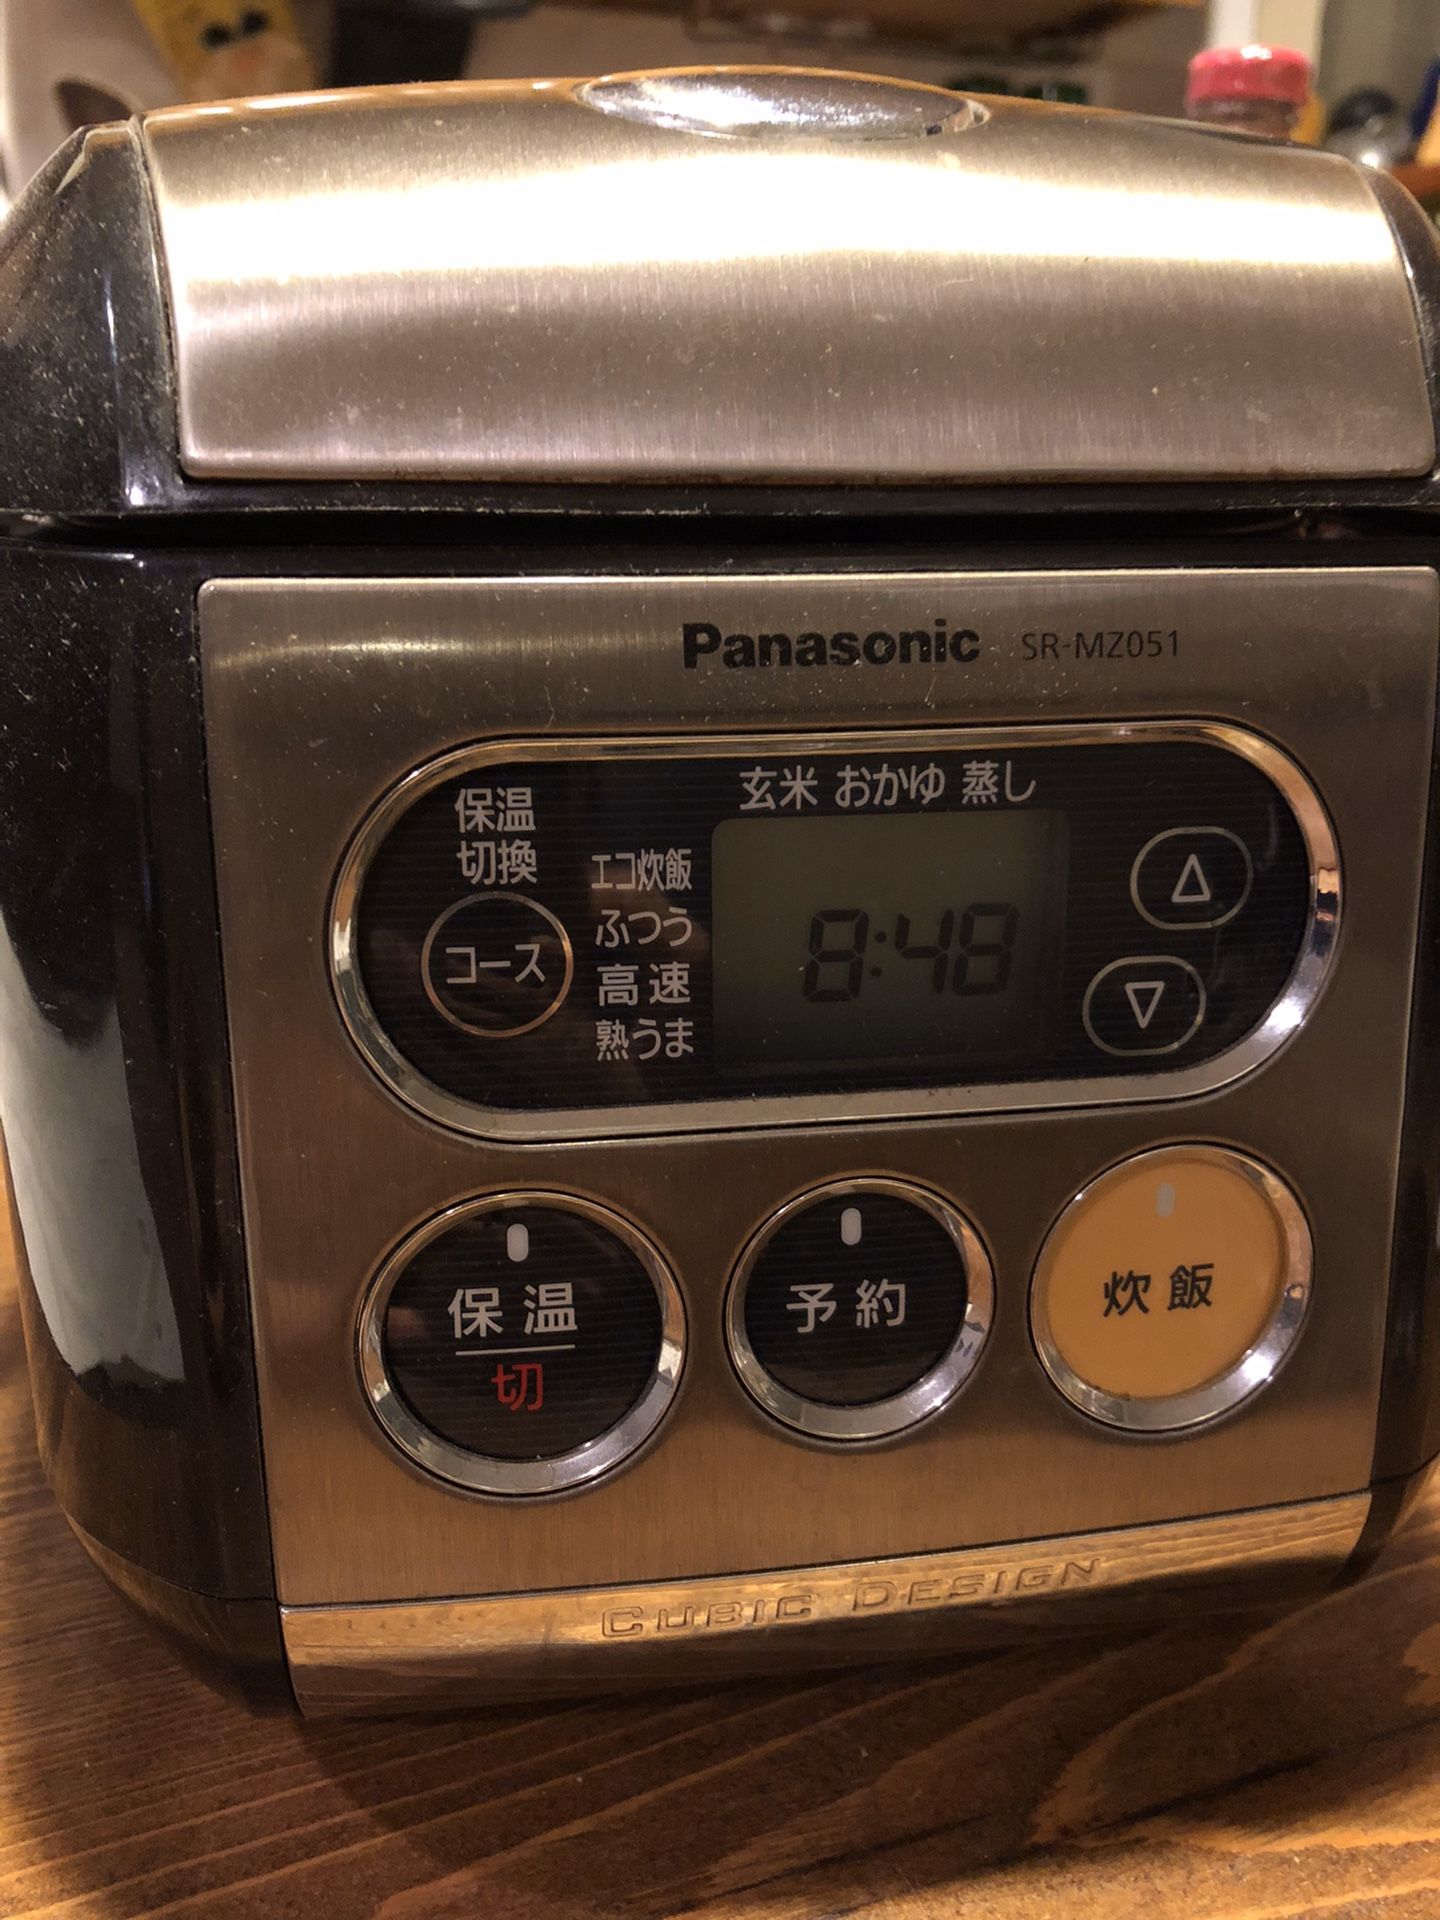 Japanese rice cooker makes up to 3cups